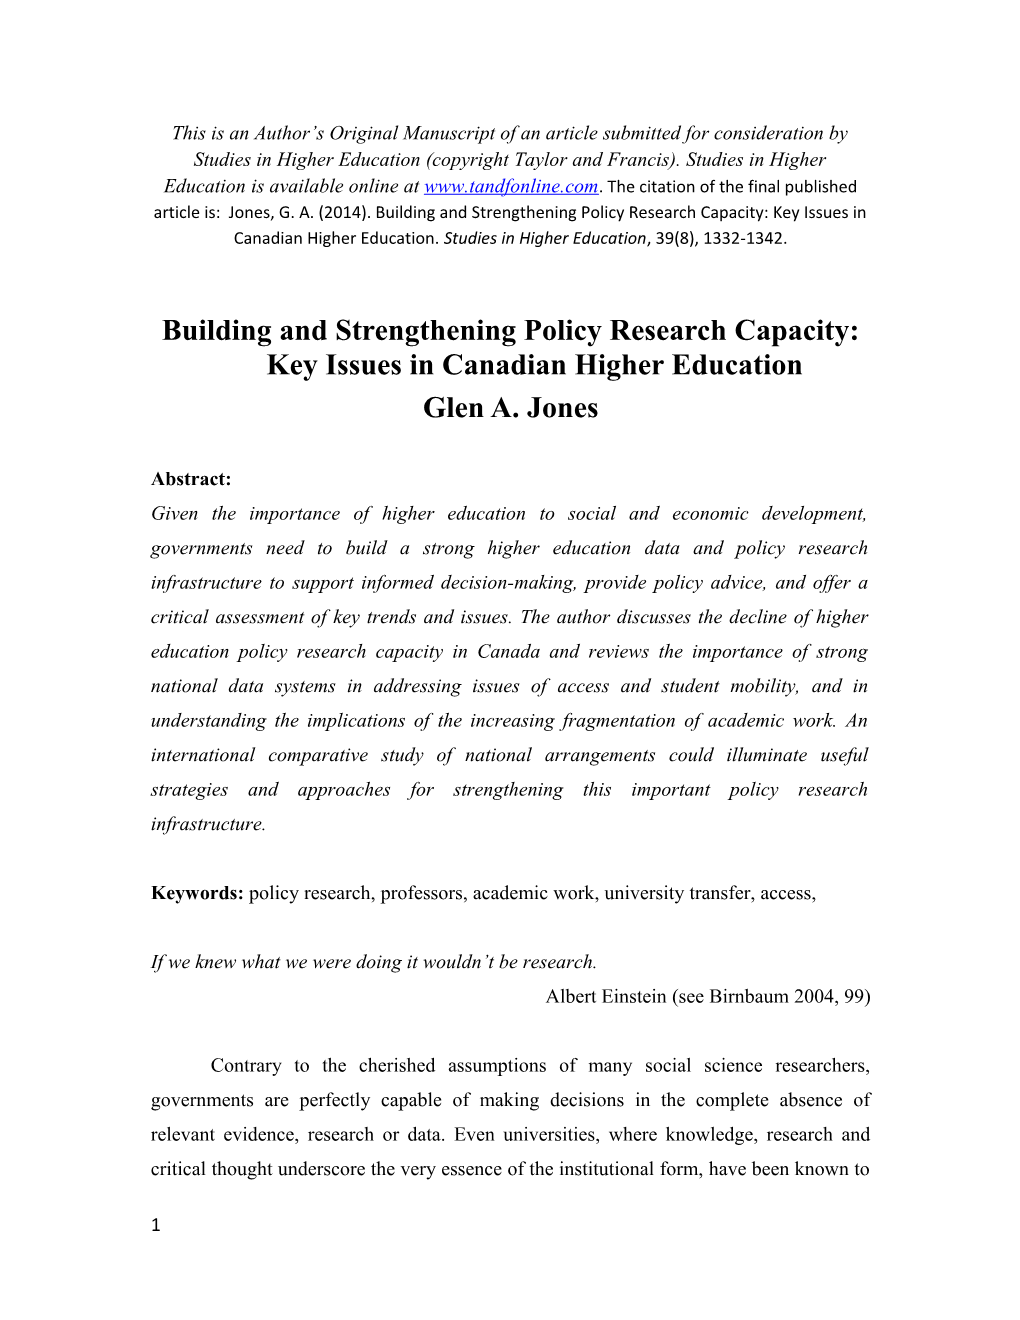 Building and Strengthening Policy Research Capacity: Key Issues in Canadian Higher Education